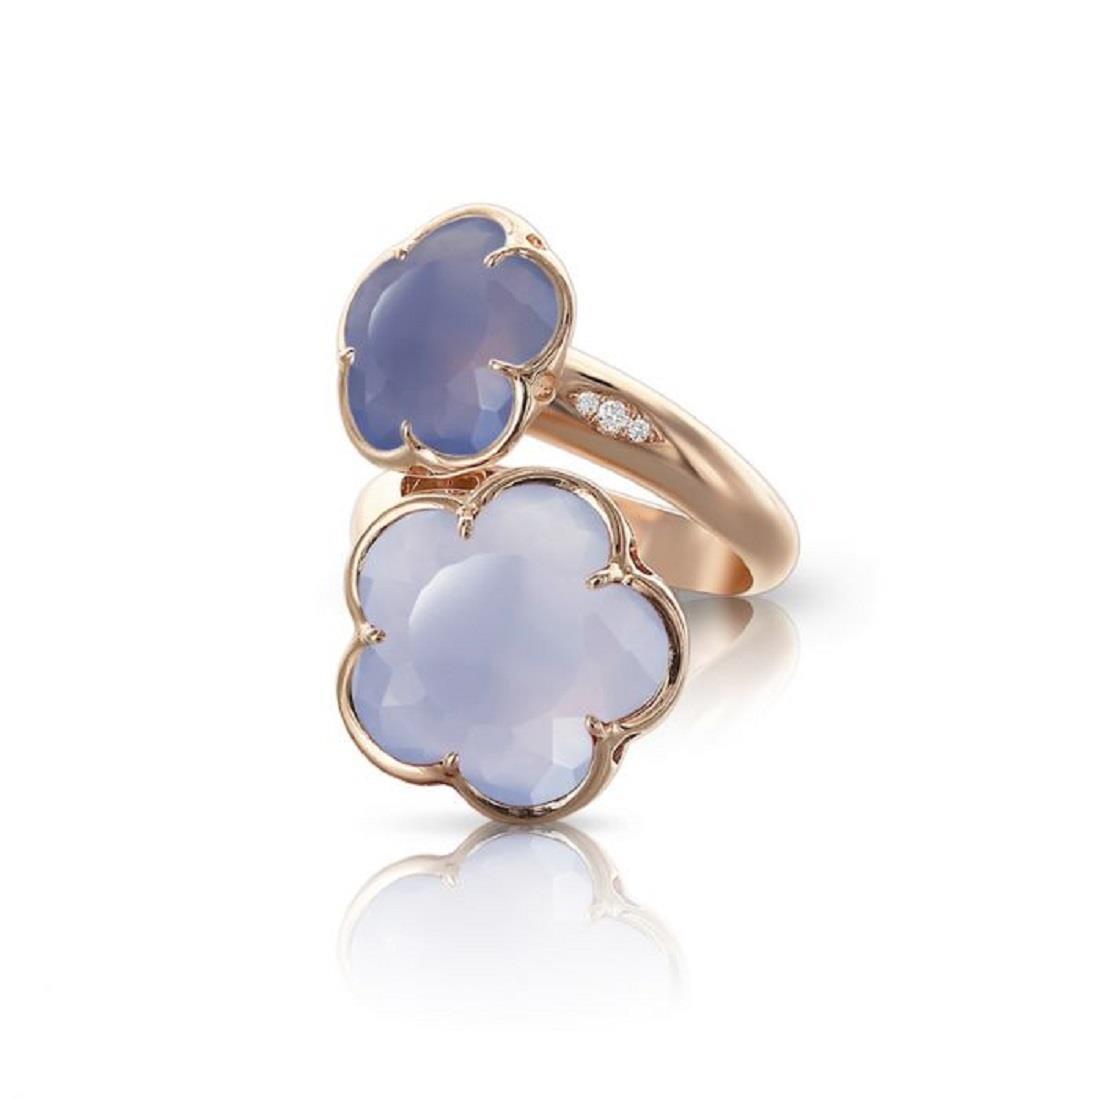 Bon Ton contrariè ring in red gold with blue chalcedony stone - PASQUALE BRUNI